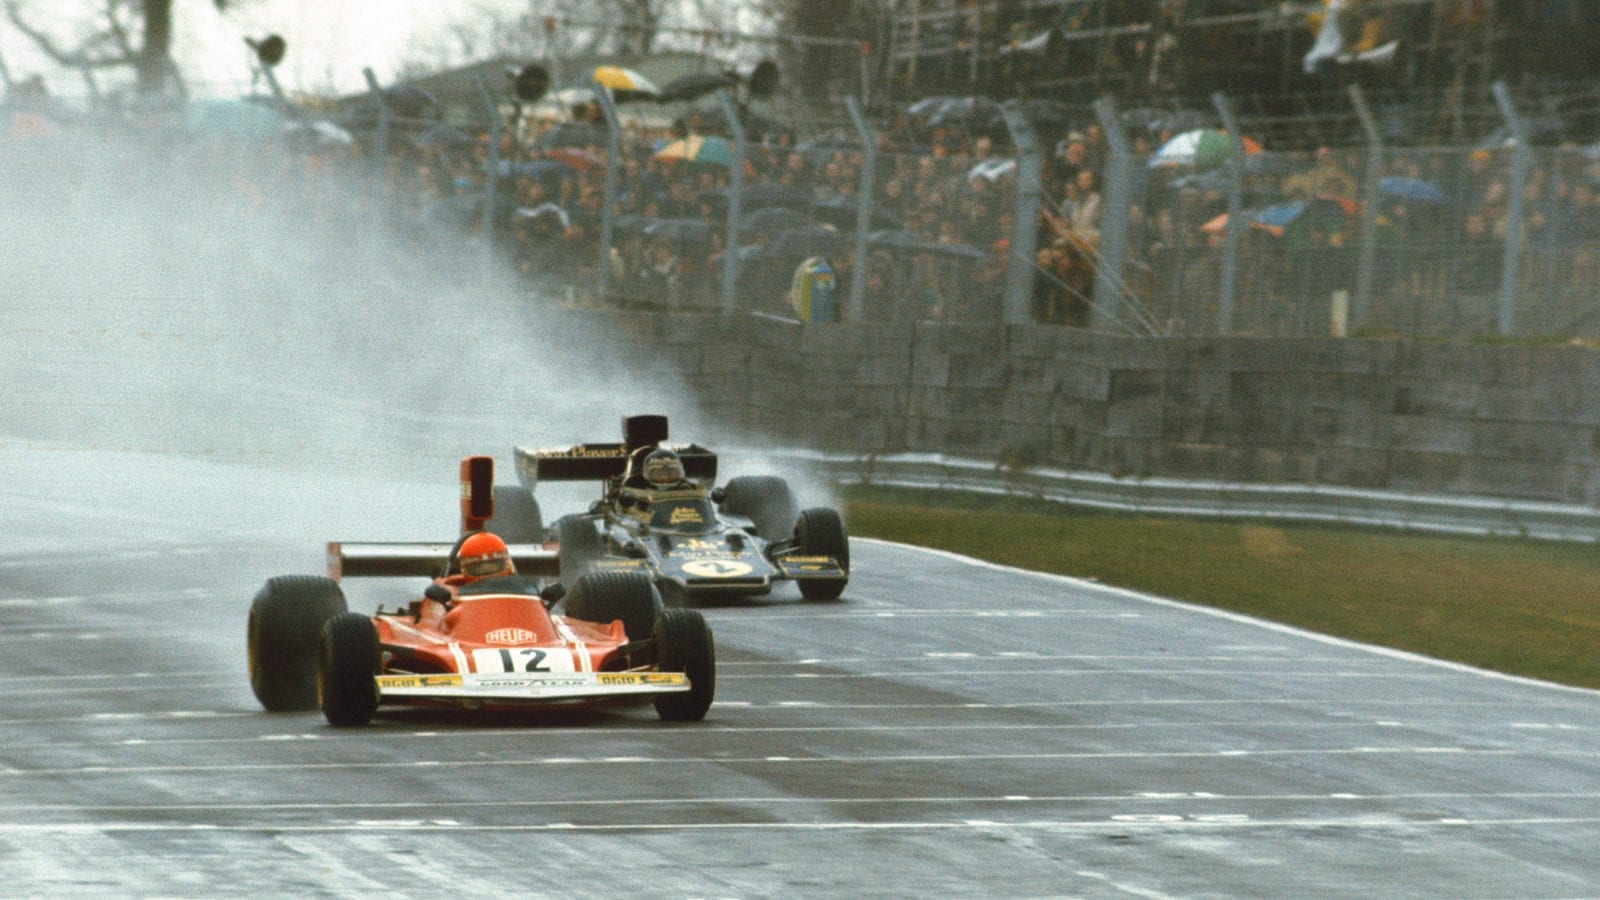 Jacky Ickx follows Nicki Lauda in the 1974 Race of Champions